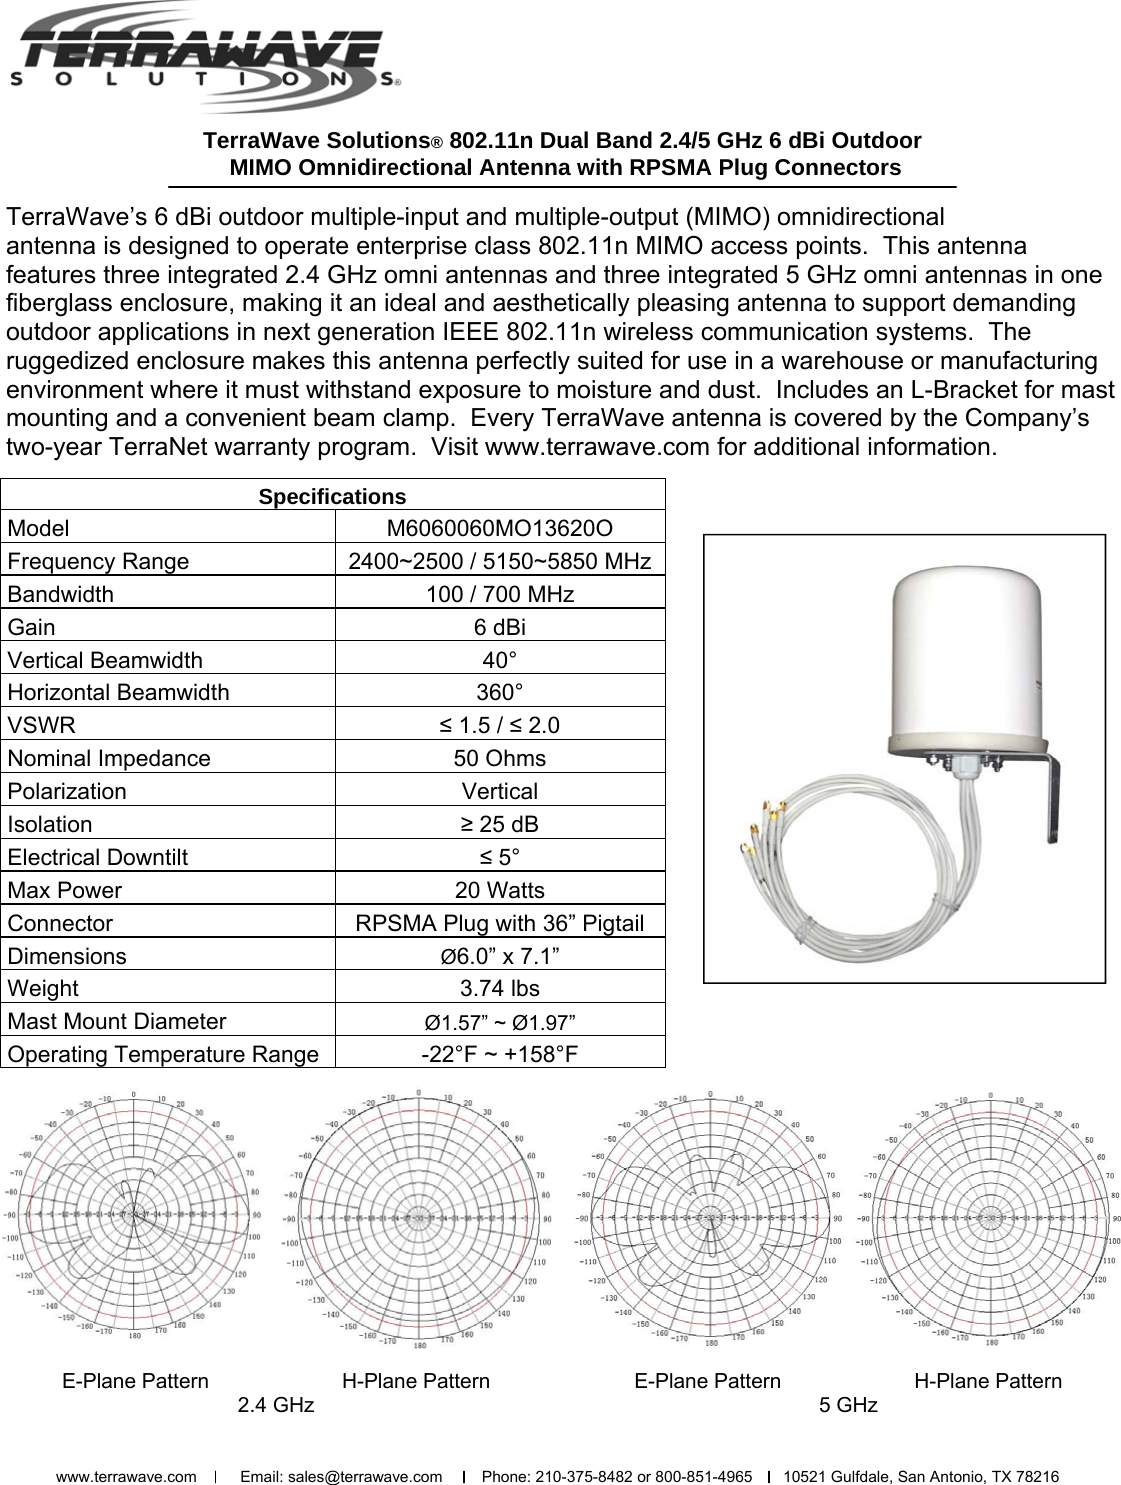 TerraWave Solutions® 802.11n Dual Band 2.4/5 GHz 6 dBi Outdoor  MIMO Omnidirectional Antenna with RPSMA Plug Connectors TerraWave’s 6 dBi outdoor multiple-input and multiple-output (MIMO) omnidirectional  antenna is designed to operate enterprise class 802.11n MIMO access points.  This antenna       features three integrated 2.4 GHz omni antennas and three integrated 5 GHz omni antennas in one fiberglass enclosure, making it an ideal and aesthetically pleasing antenna to support demanding outdoor applications in next generation IEEE 802.11n wireless communication systems.  The       ruggedized enclosure makes this antenna perfectly suited for use in a warehouse or manufacturing environment where it must withstand exposure to moisture and dust.  Includes an L-Bracket for mast mounting and a convenient beam clamp.  Every TerraWave antenna is covered by the Company’s two-year TerraNet warranty program.  Visit www.terrawave.com for additional information.  Specifications  Model  M6060060MO13620O  Frequency Range  2400~2500 / 5150~5850 MHz  Bandwidth   100 / 700 MHz  Gain   6 dBi  Vertical Beamwidth   40°  Horizontal Beamwidth   360°  VSWR  ≤ 1.5 / ≤ 2.0  Nominal Impedance   50 Ohms  Polarization Vertical  Isolation  ≥ 25 dB  Electrical Downtilt  ≤ 5°  Max Power   20 Watts  Connector  RPSMA Plug with 36” Pigtail  Dimensions  Ø6.0” x 7.1”  Weight   3.74 lbs  Mast Mount Diameter  Ø1.57” ~ Ø1.97”  Operating Temperature Range  -22°F ~ +158°F E-Plane Pattern                       H-Plane Pattern   2.4 GHz   E-Plane Pattern                       H-Plane Pattern   5 GHz   www.terrawave.com          Email: sales@terrawave.com         Phone: 210-375-8482 or 800-851-4965       10521 Gulfdale, San Antonio, TX 78216                